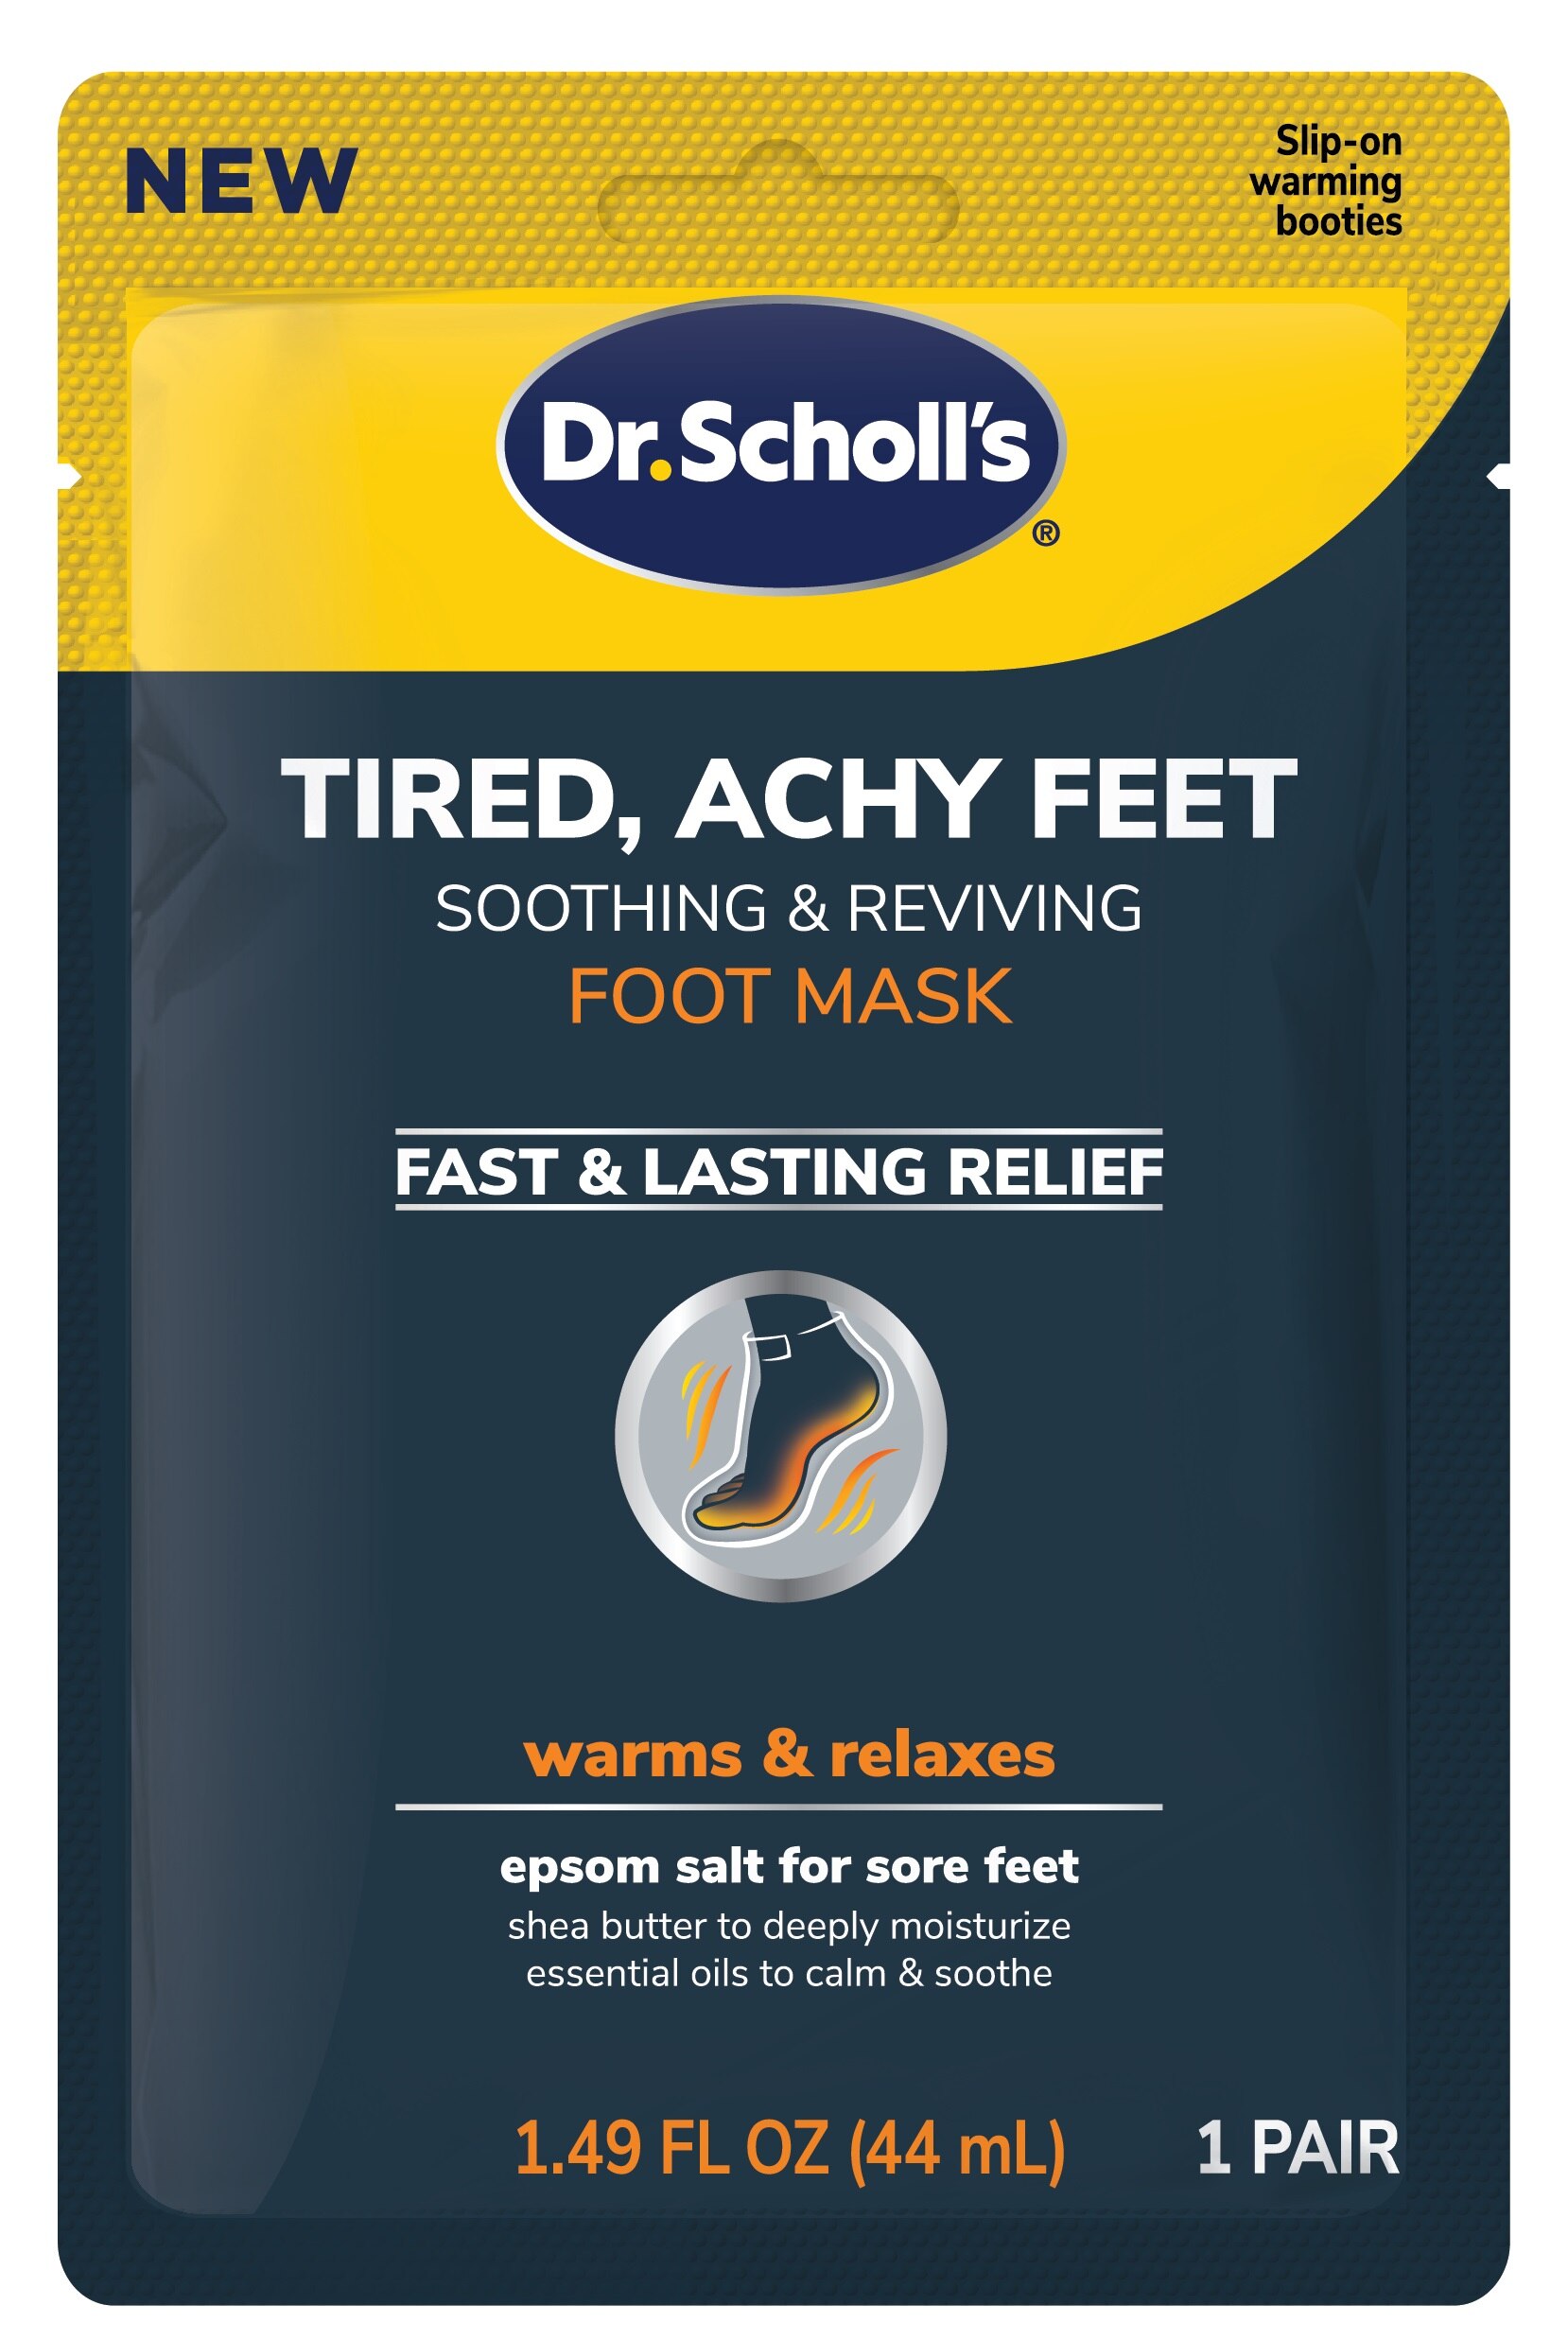 Dr Scholl's Dr. Scholl's Tired, Achy Feet Soothing & Reviving Foot Mask, Relieves Sore Muscles, 3 Pair , CVS